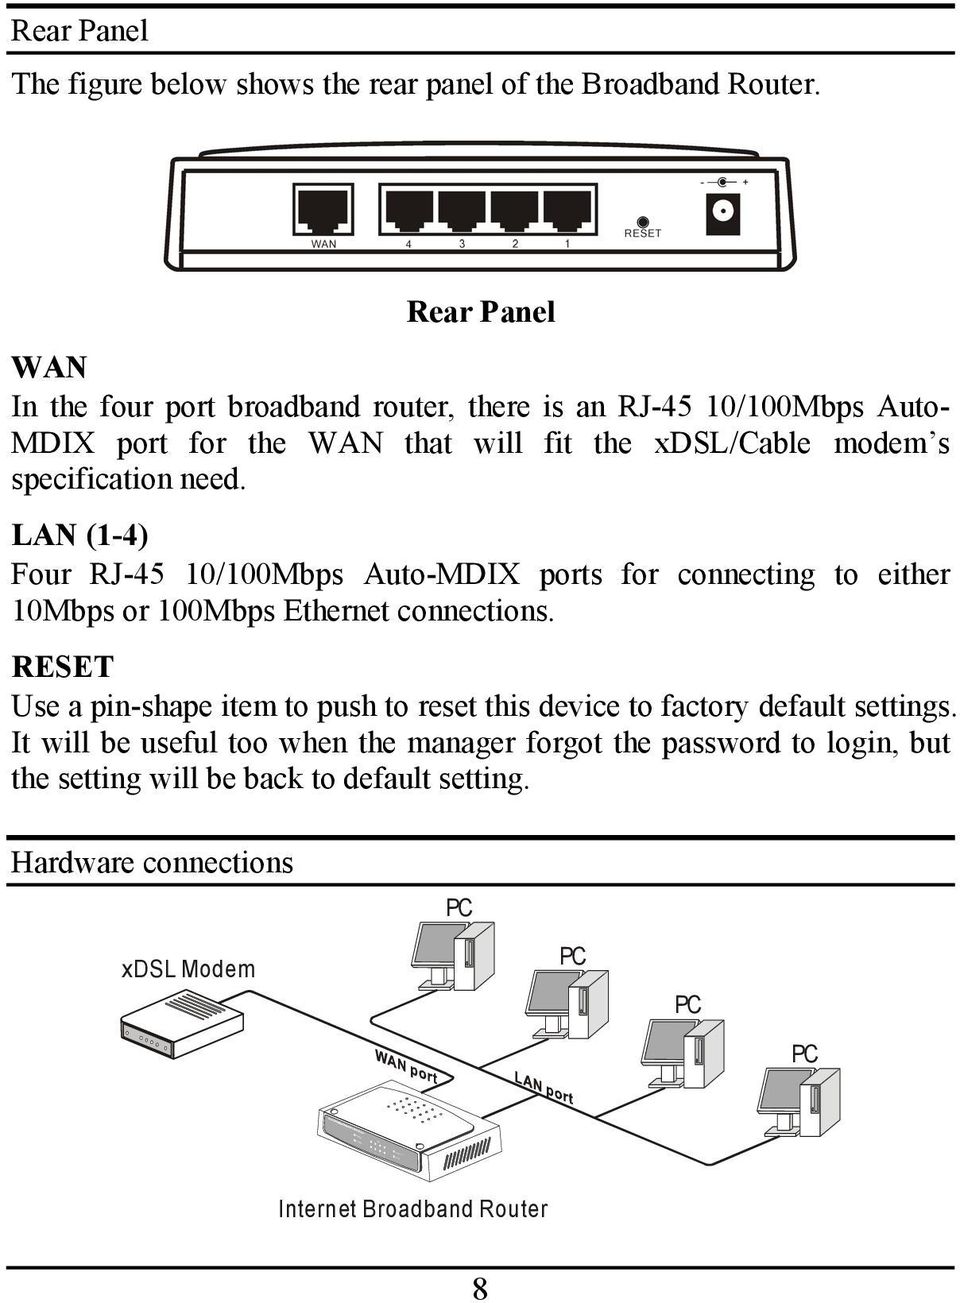 LAN (1-4) Four RJ-45 10/100Mbps Auto-MDIX ports for connecting to either 10Mbps or 100Mbps Ethernet connections.